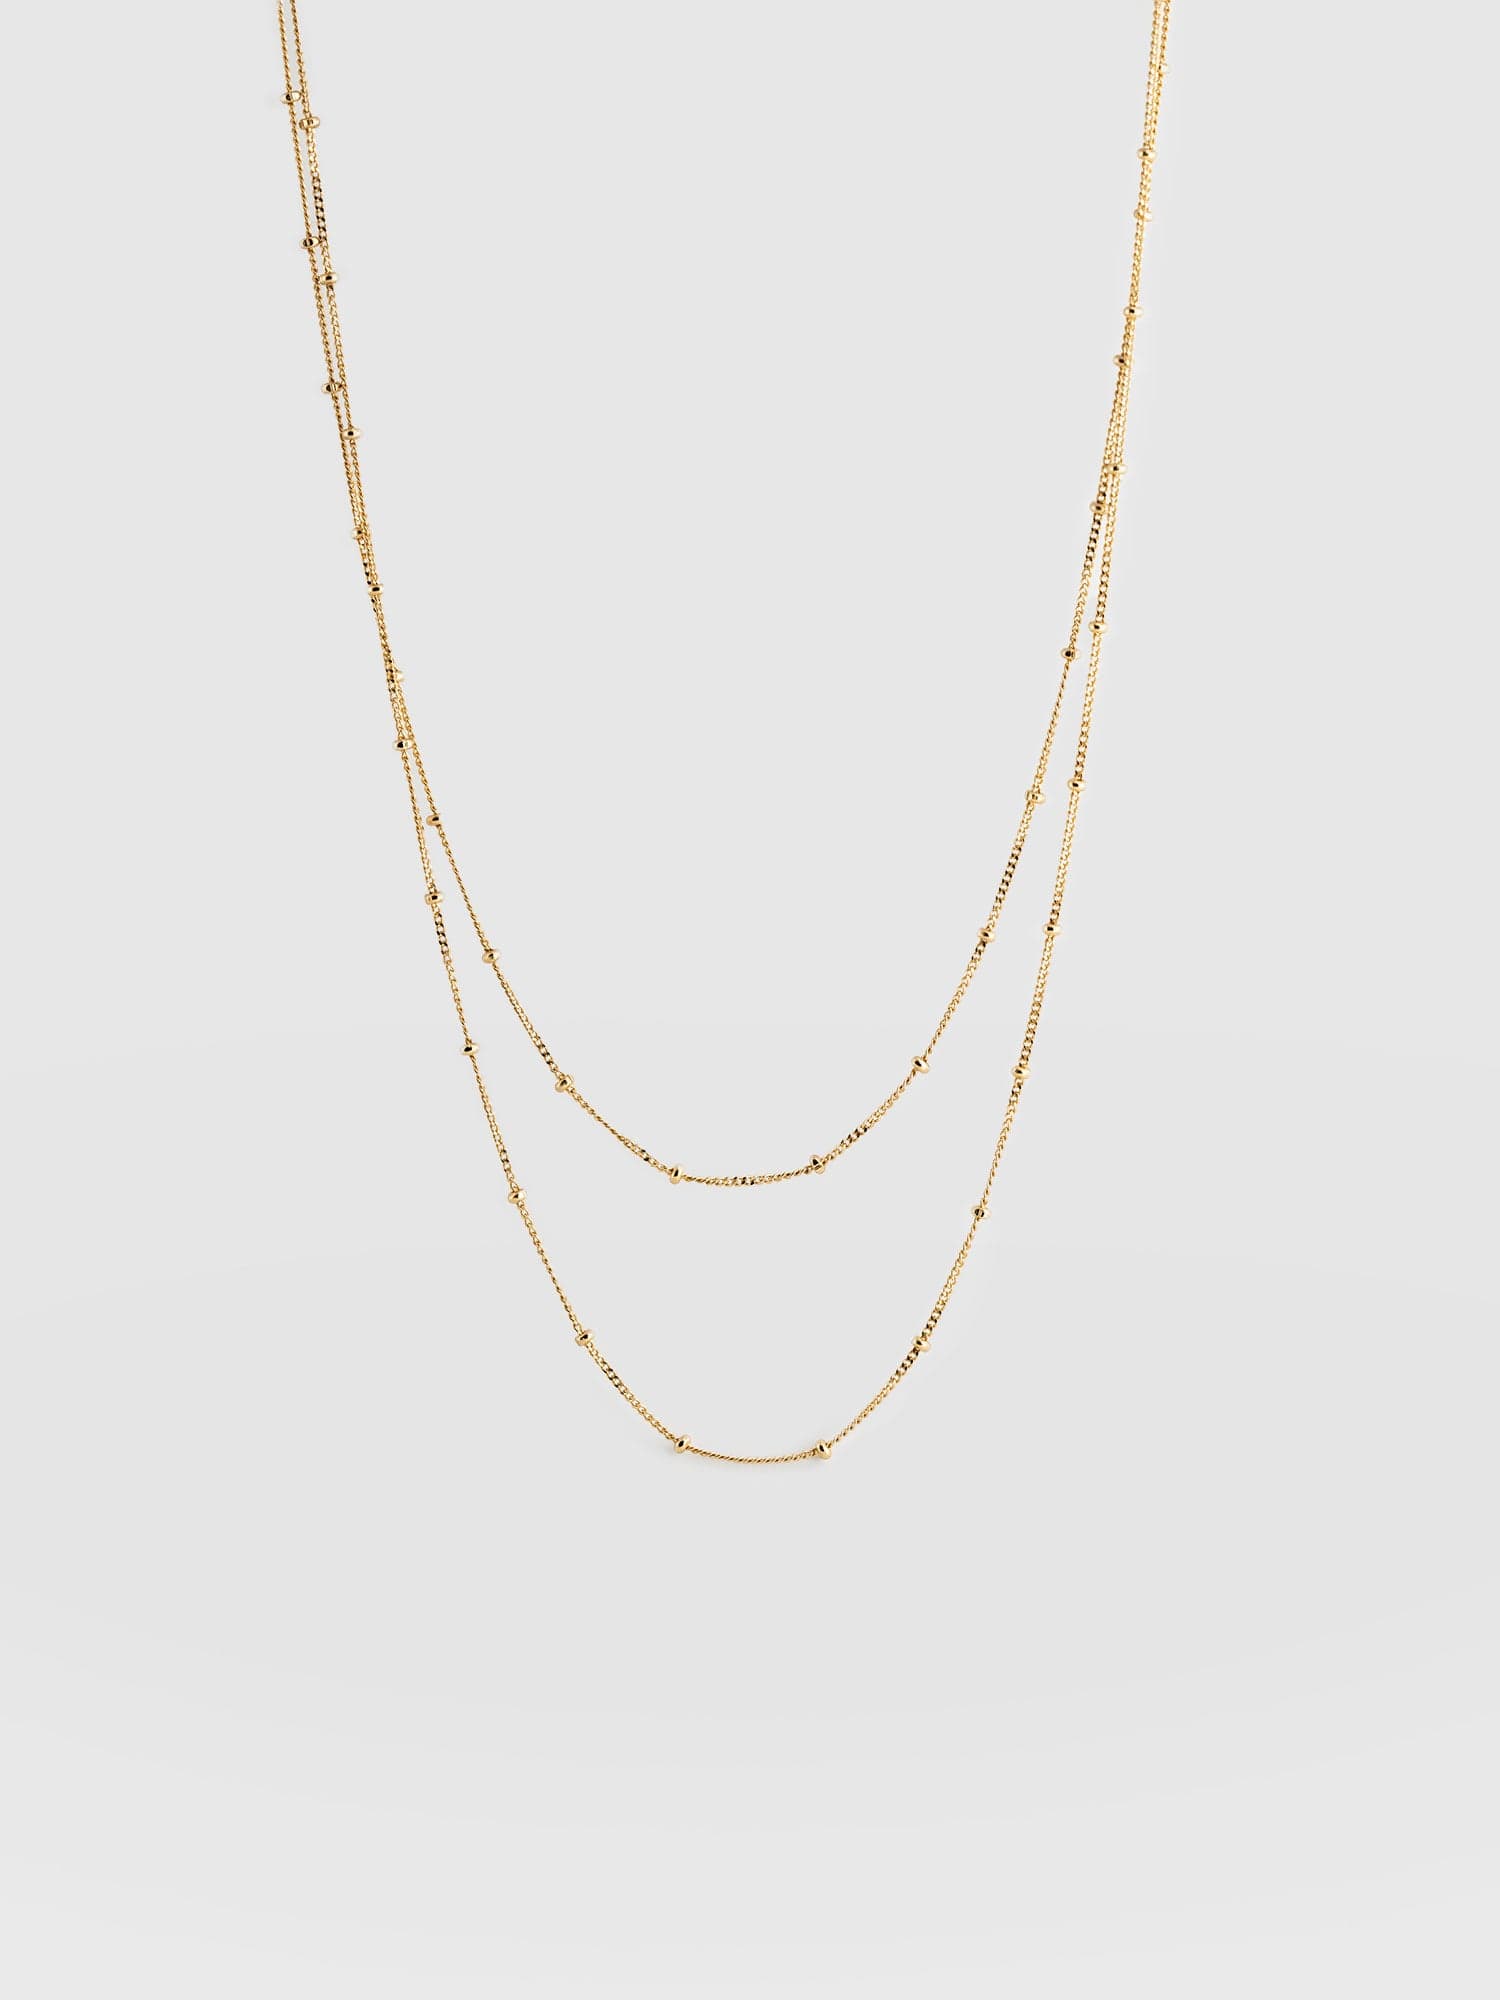 Zoe Chicco Double Layer Chain Necklace | Skeie's Jewelers